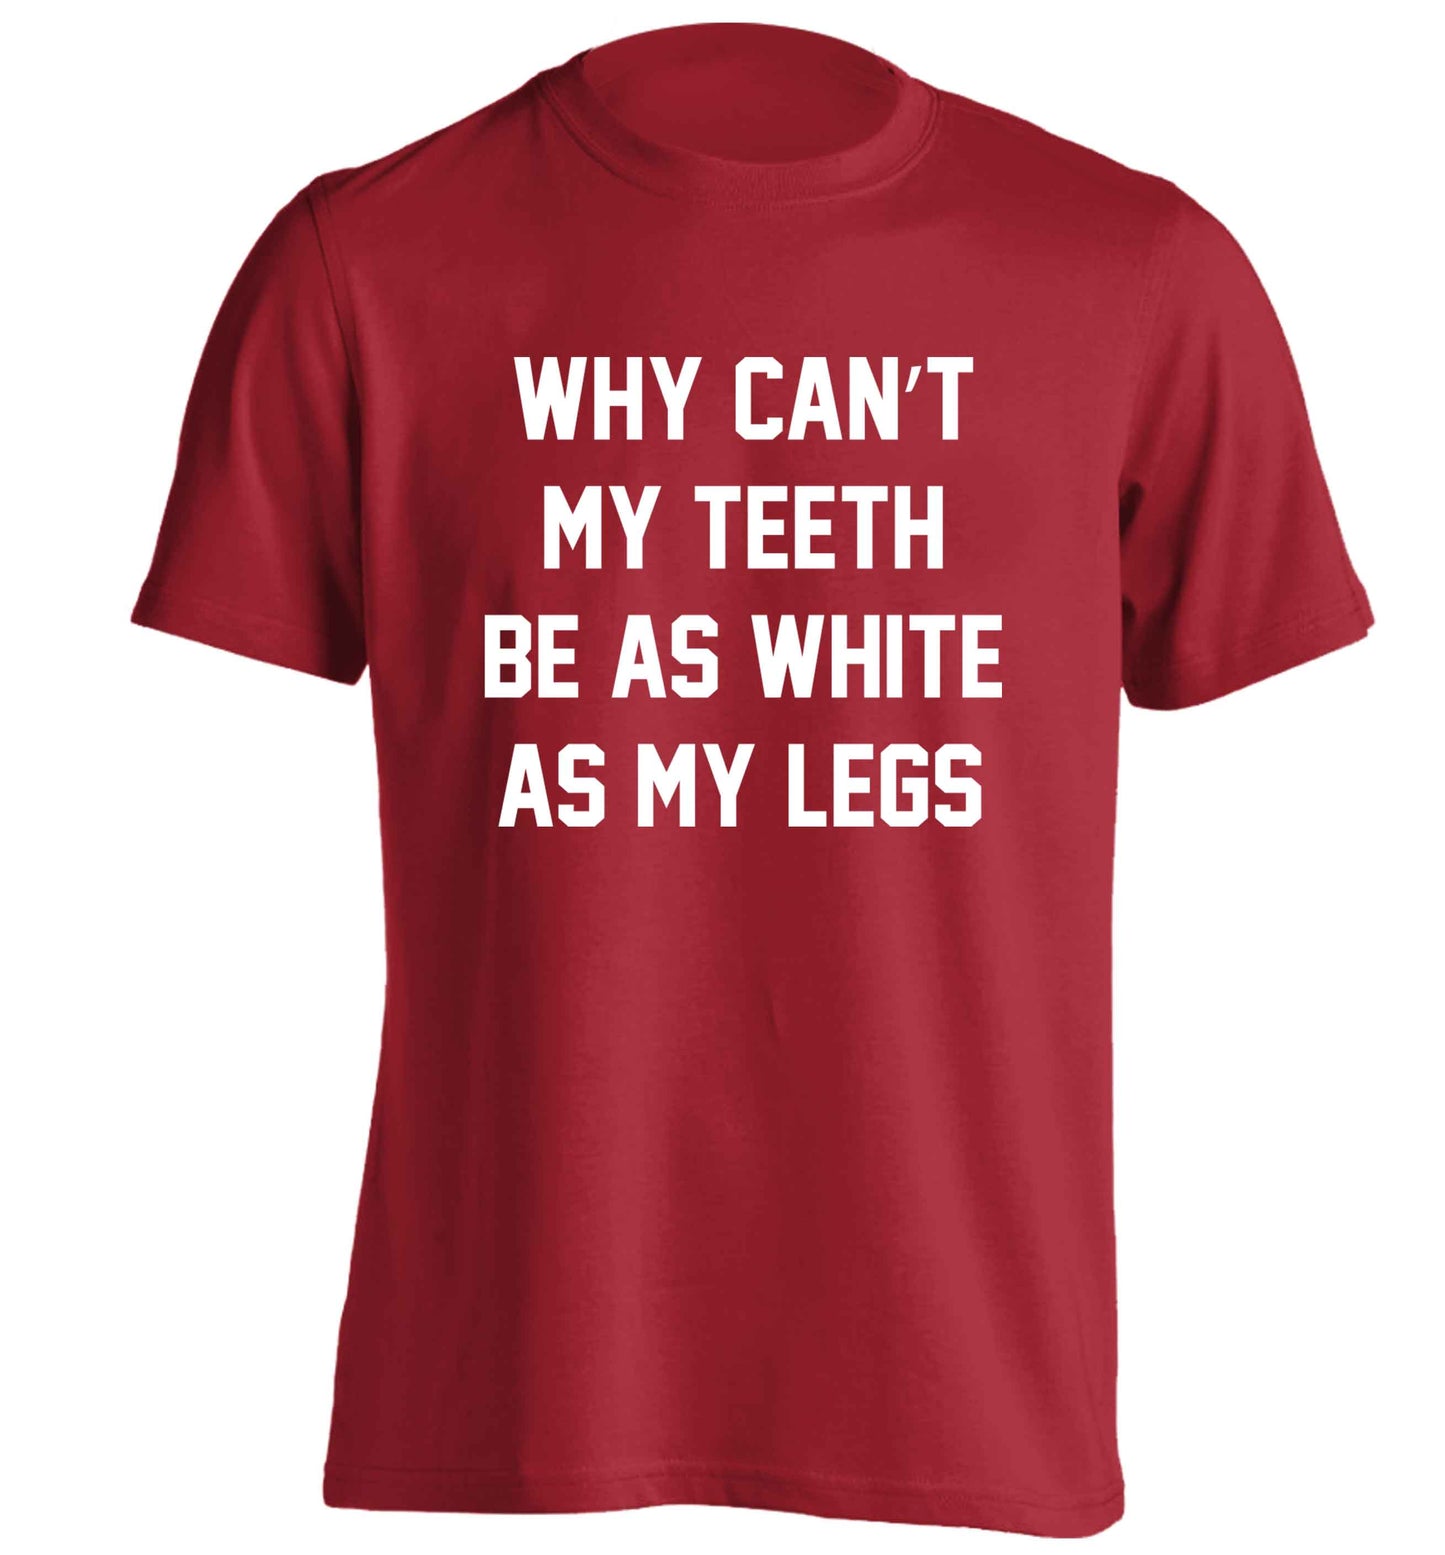 Why can't my teeth be as white as my legs adults unisex red Tshirt 2XL